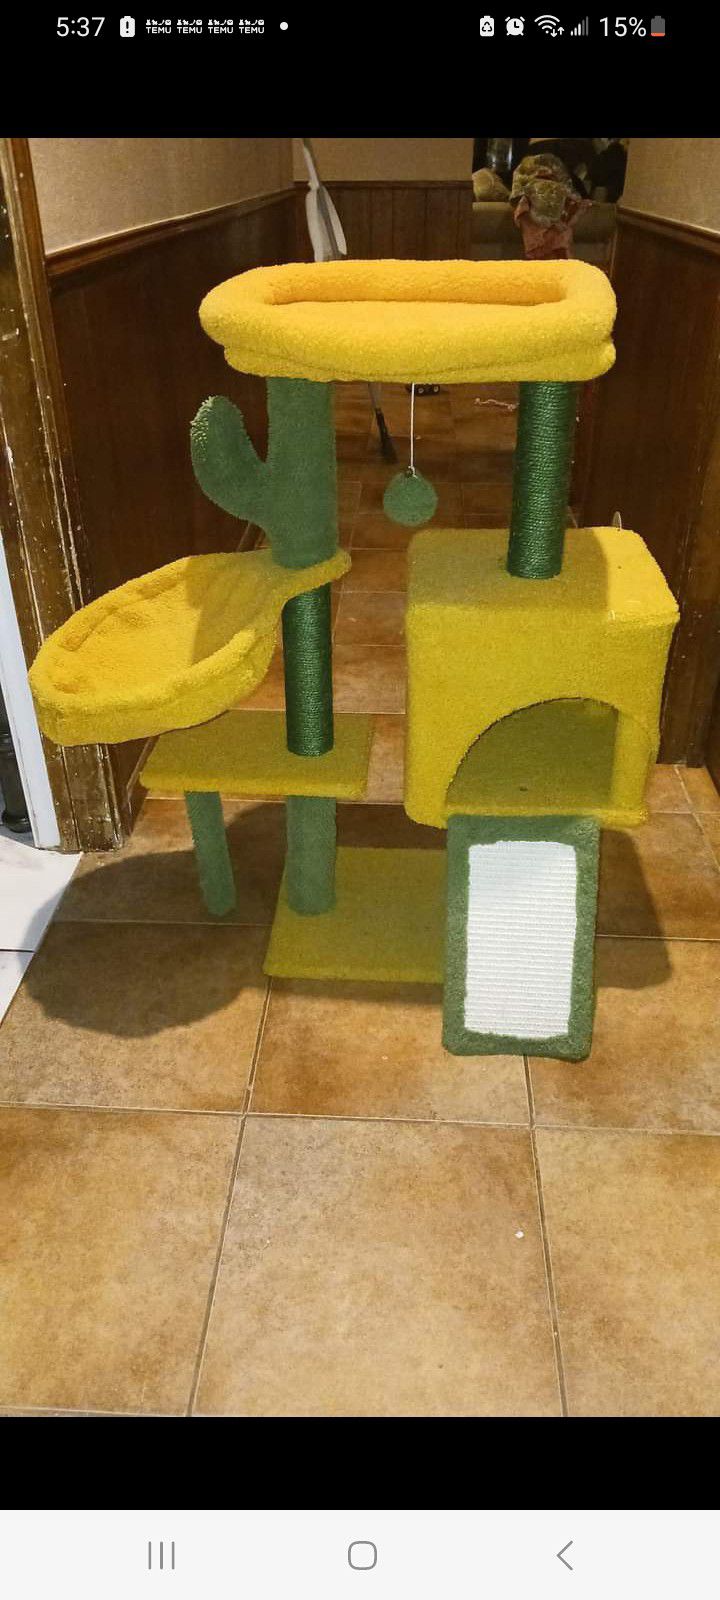 Playhouse for cat $20.